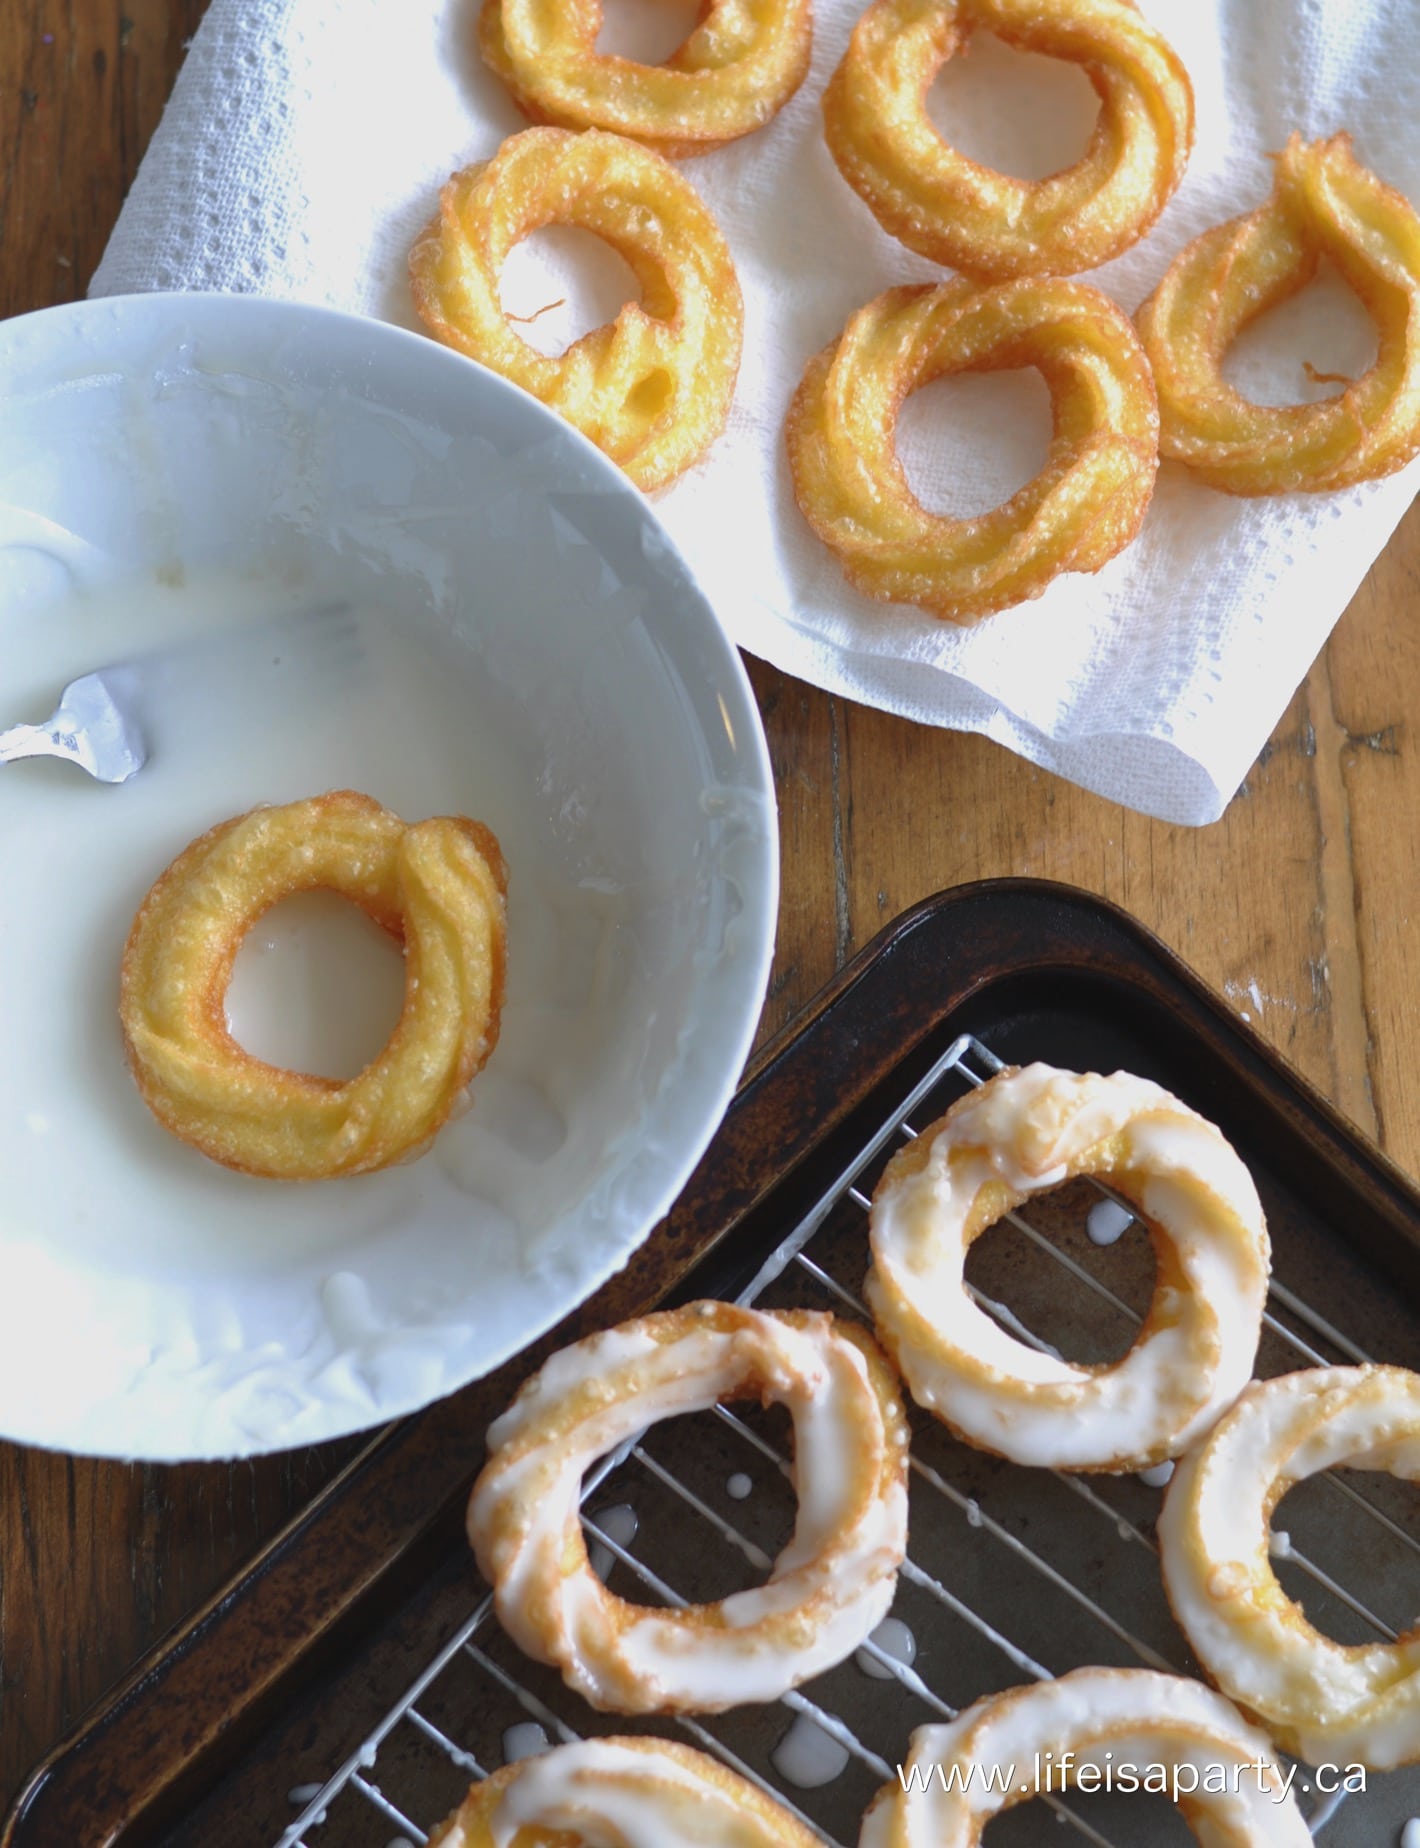 Homemade Honey Cruller Donuts that have just been fried, and dipped in glaze